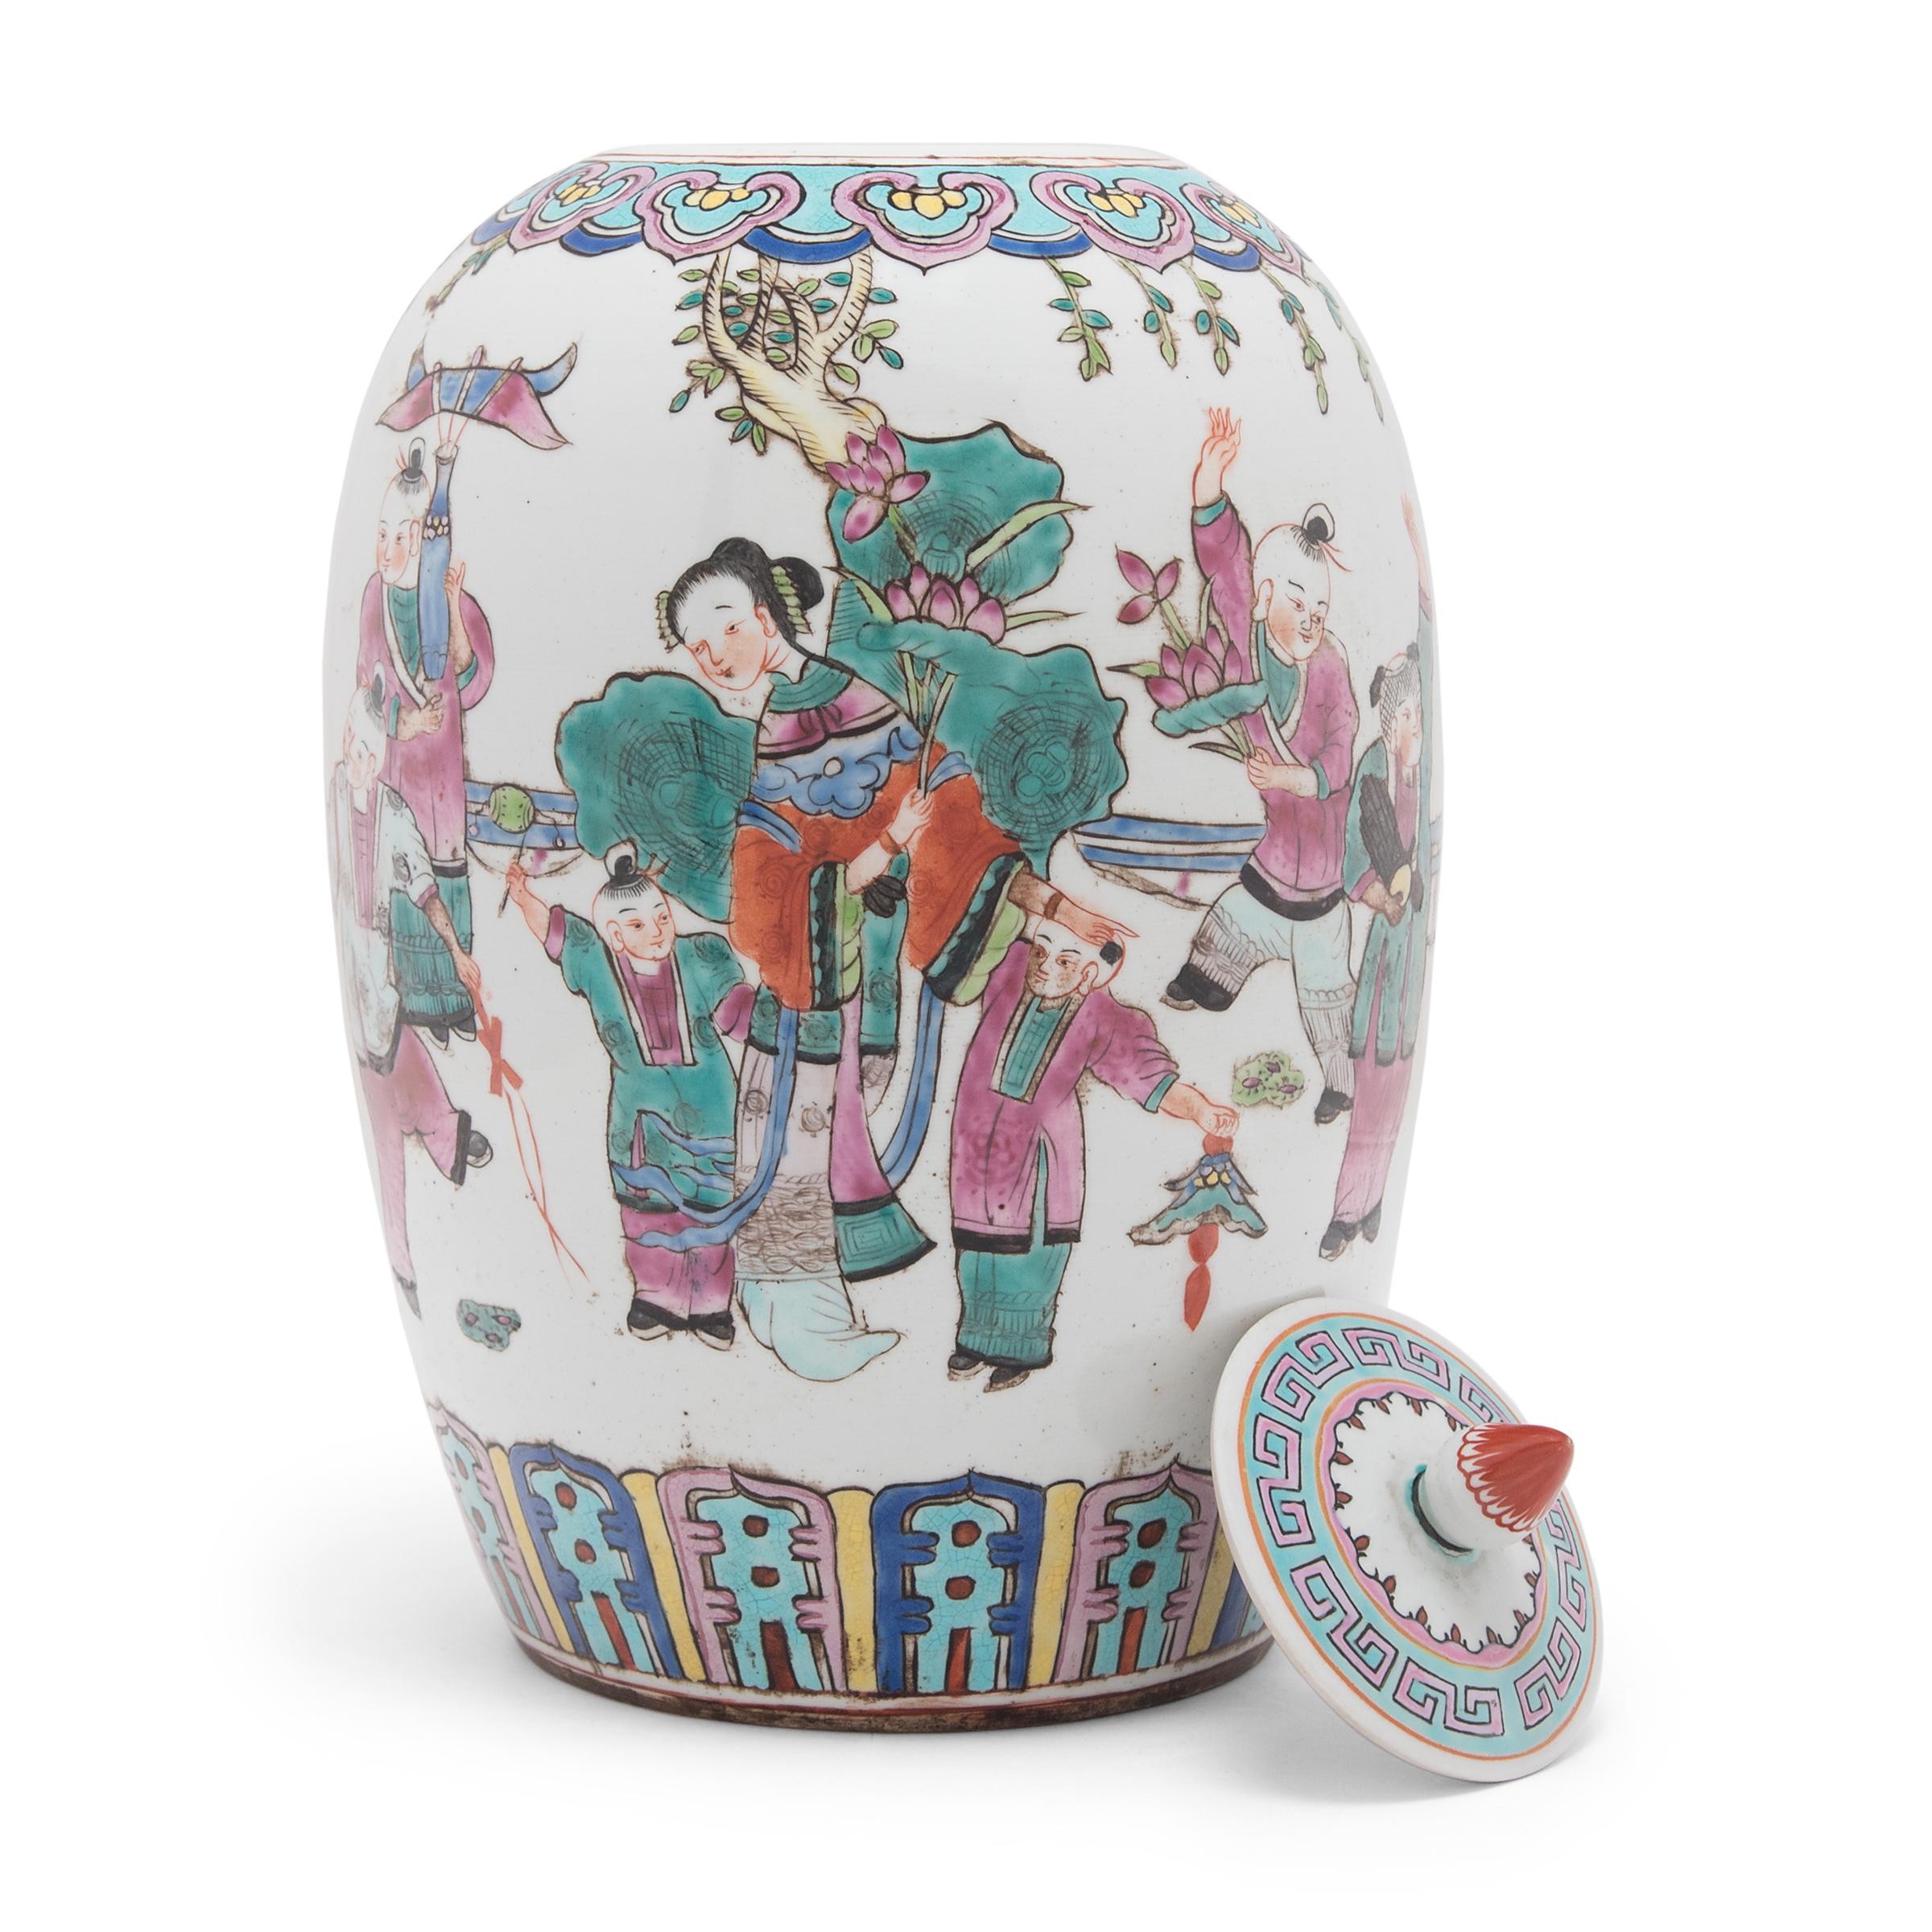 Porcelain Chinese Famille Rose Ginger Jar with Boys at Play, c. 1900